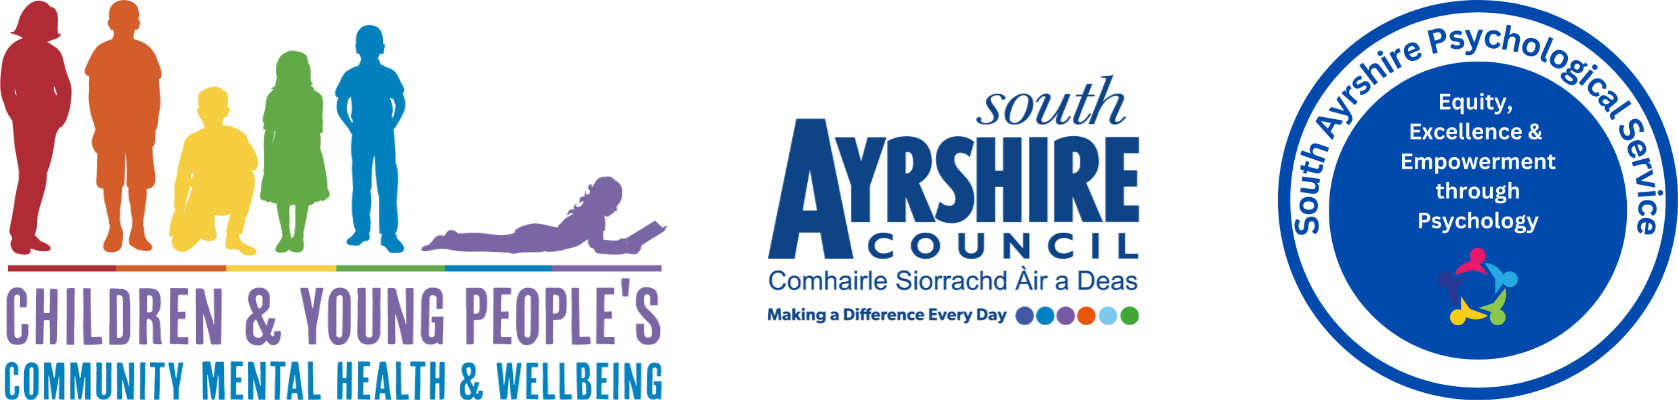 south ayrshire council logo alonh with South Ayrshire Psychological Services logo